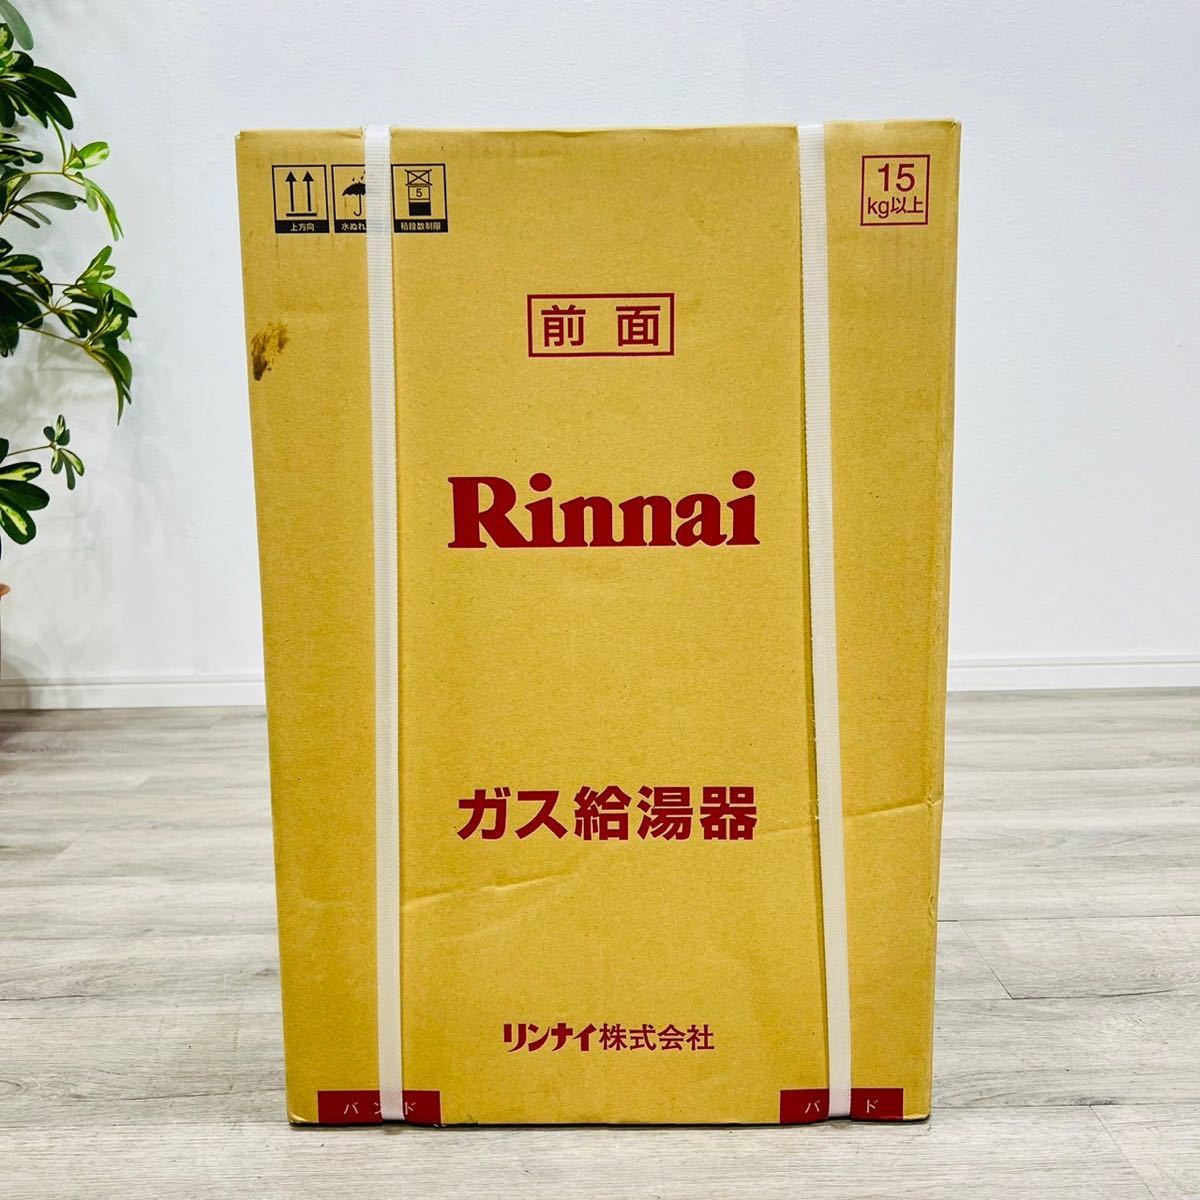 Rinnai a1928 gas water heater 20 number city gas 2023 year made 15